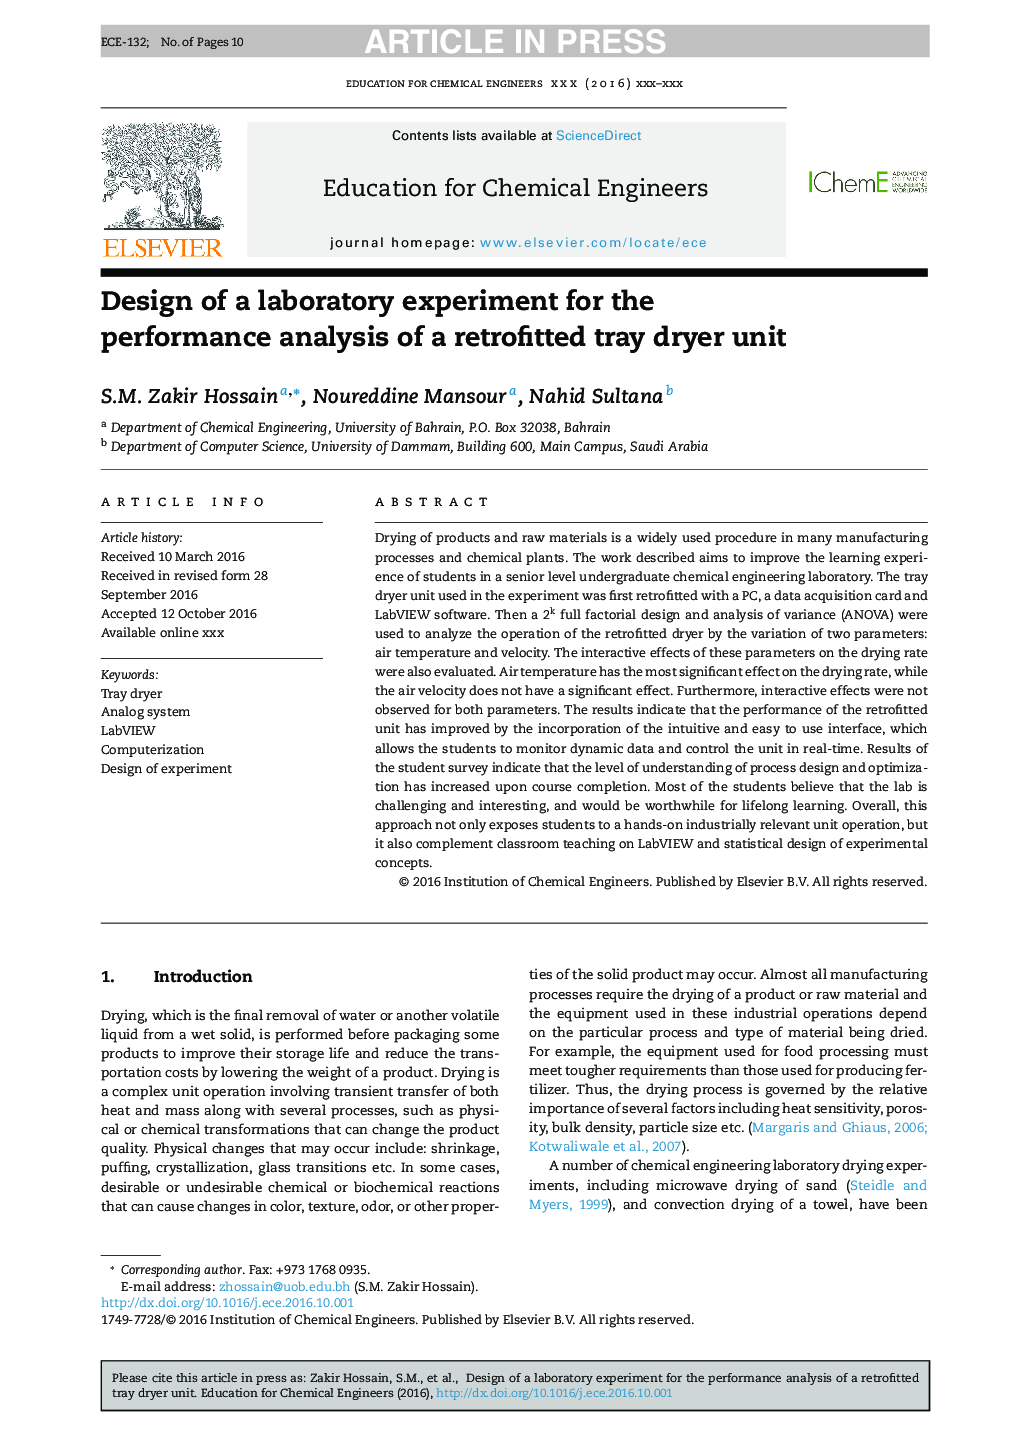 Design of a laboratory experiment for the performance analysis of a retrofitted tray dryer unit